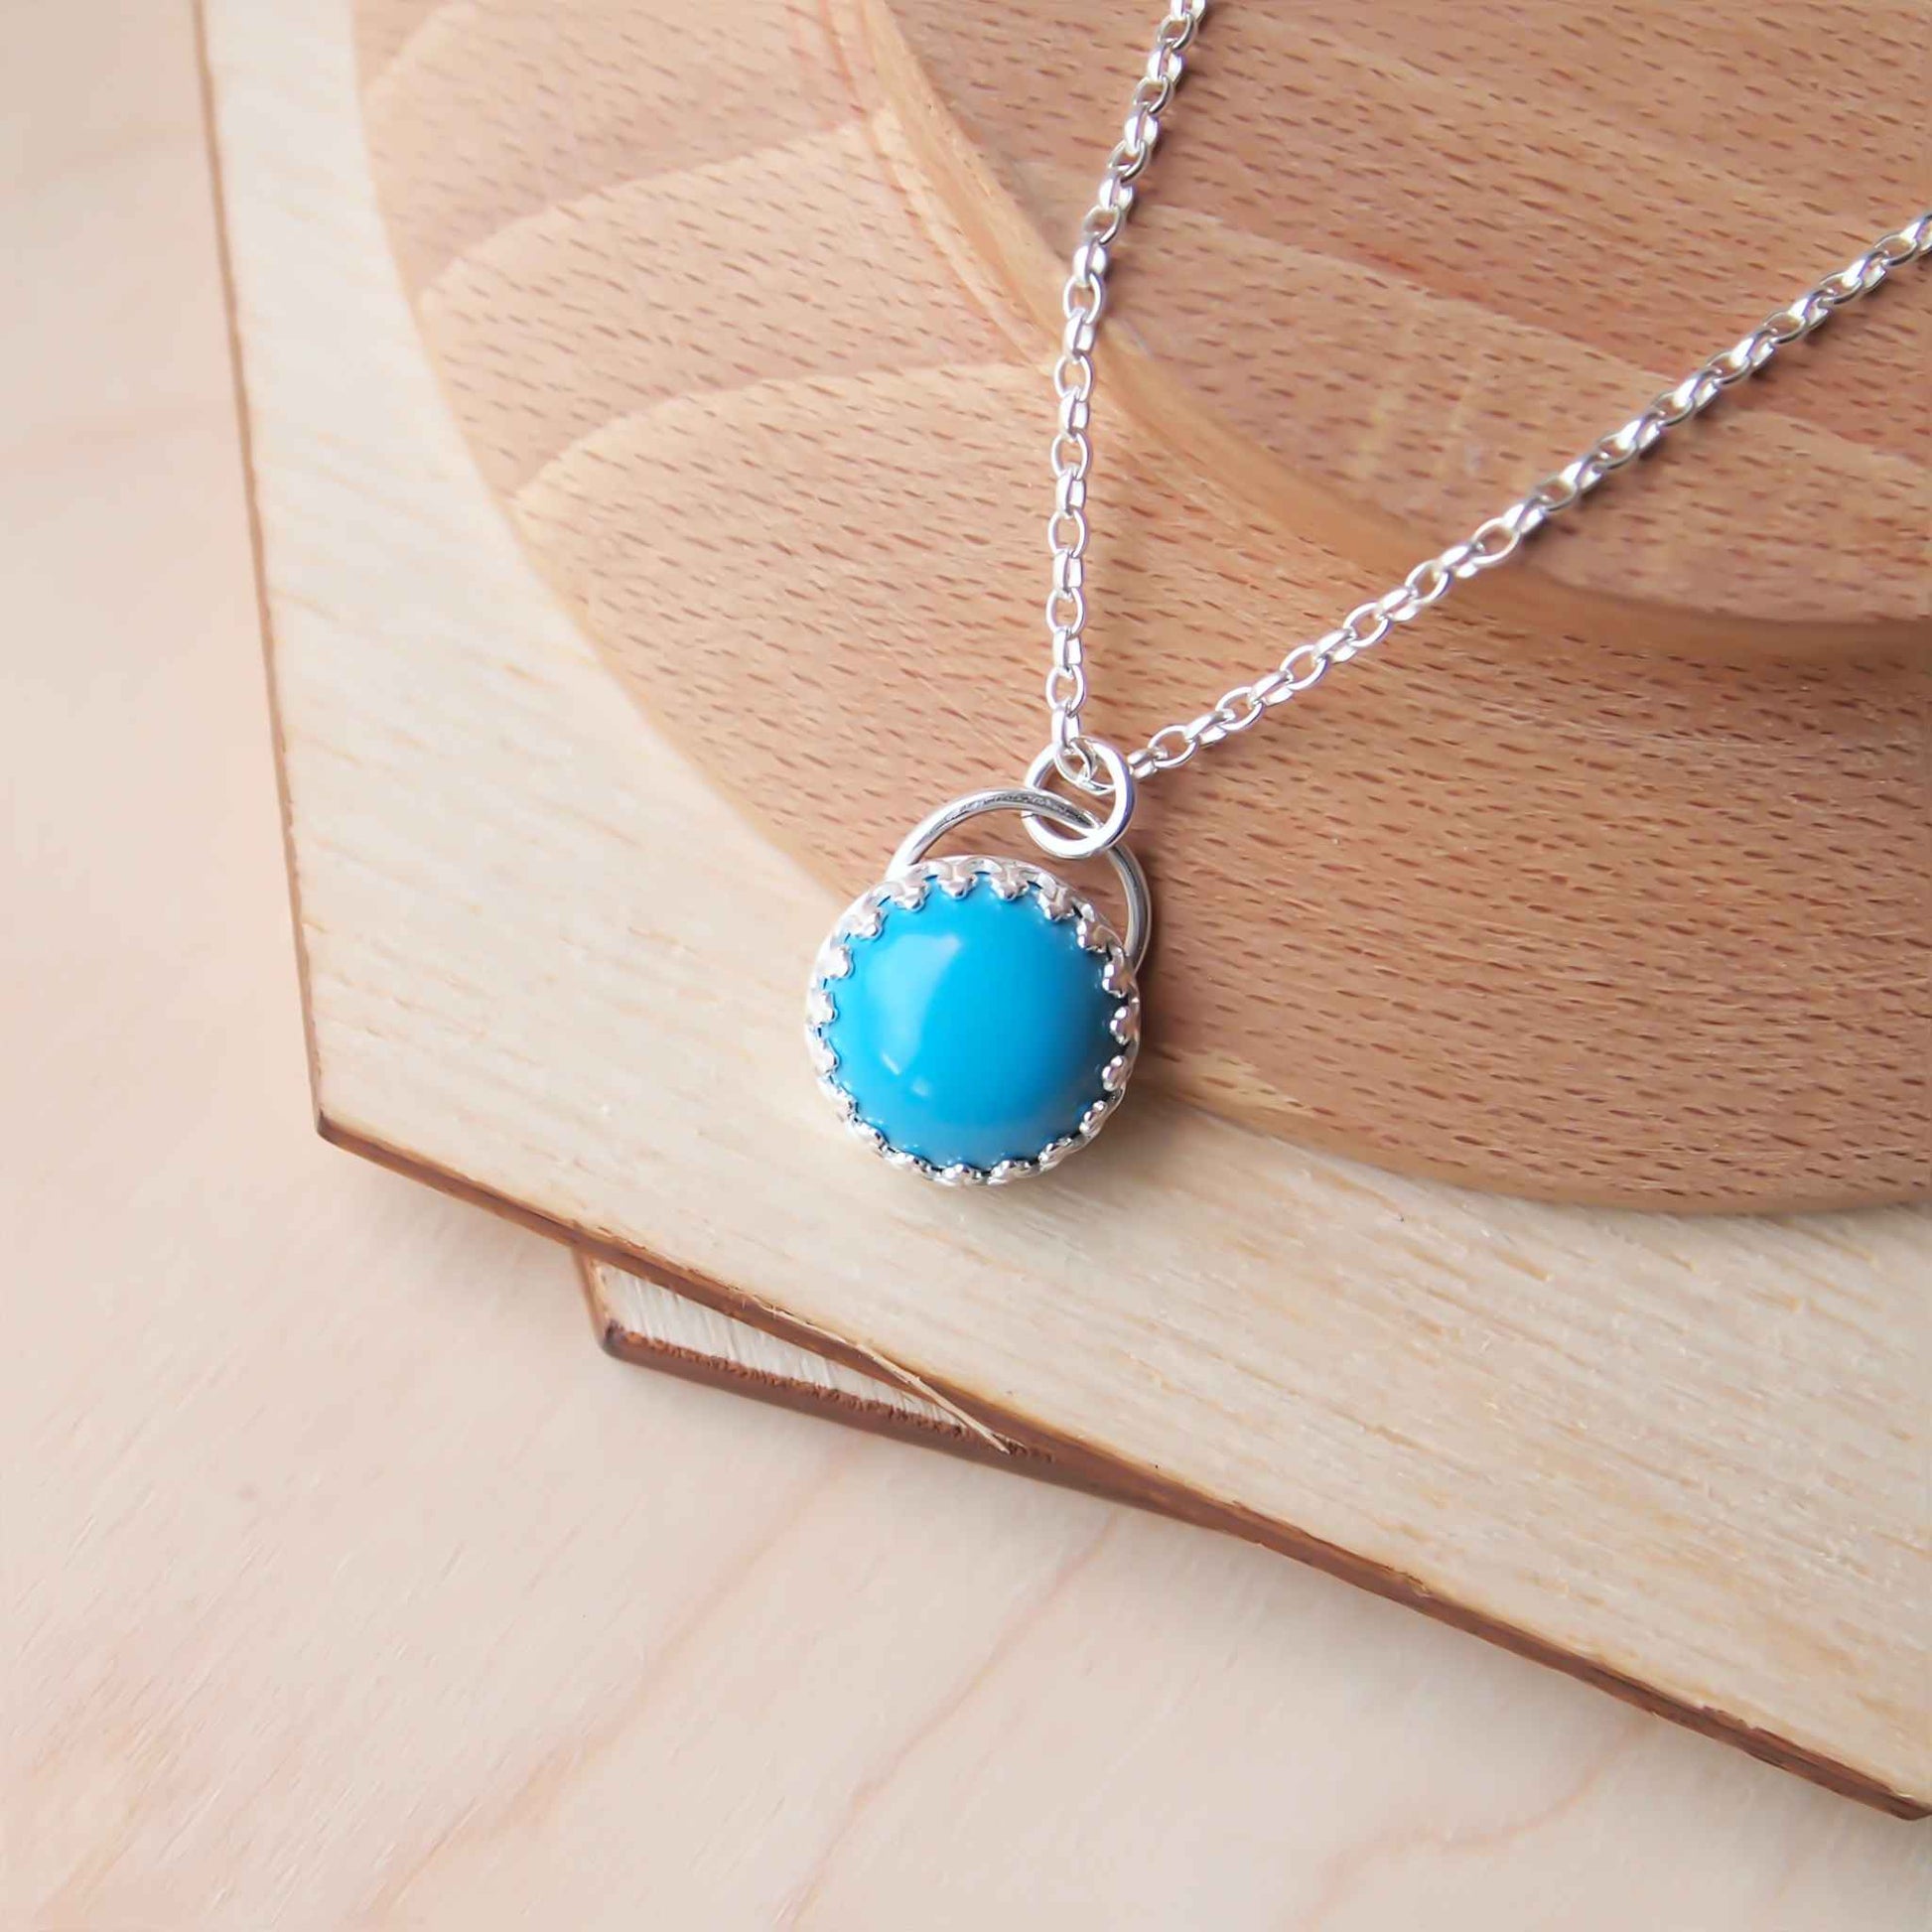 Turquoise gemstone necklace, simple style with a lacy filigree edge to the setting. Made from Sterling Silver and a 10mm sized round cabochon stone and supplied with a chain in a choice of lengths.Handmade by maram jewellery, a small artisan jeweller working in Edinburgh Scotland making small batch individual jewellery